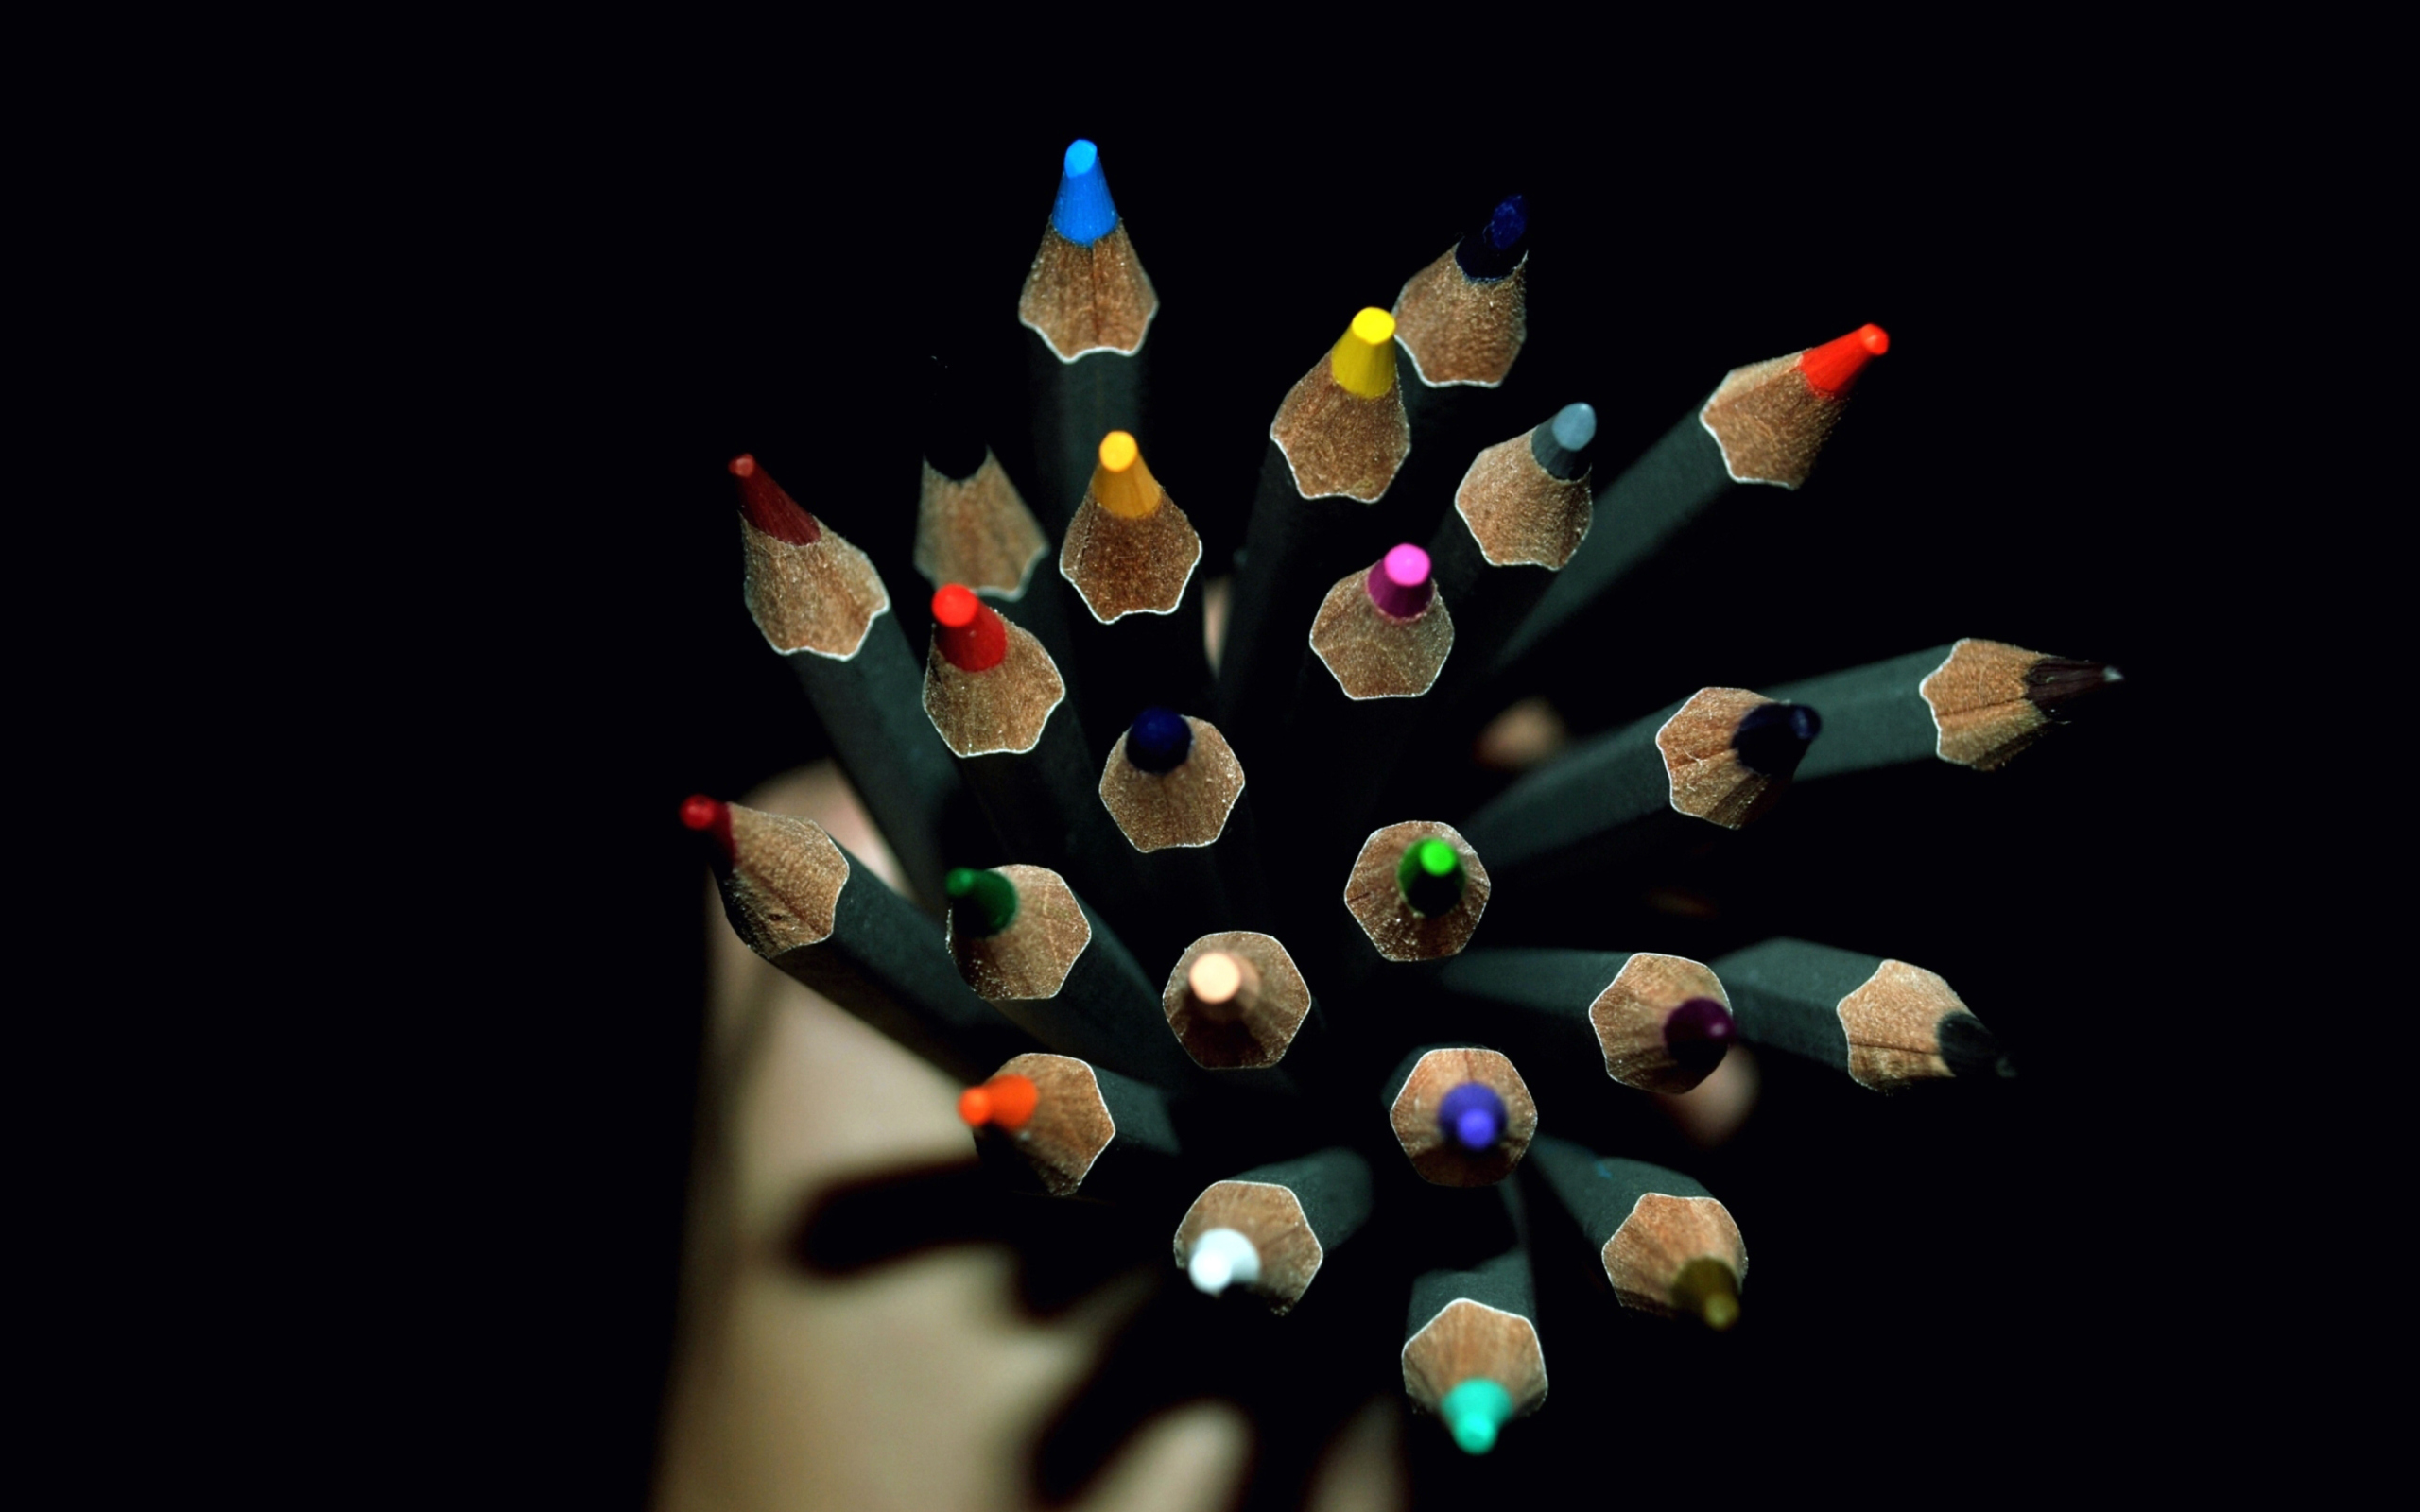 Colorful Pencils In Hand wallpaper 2560x1600